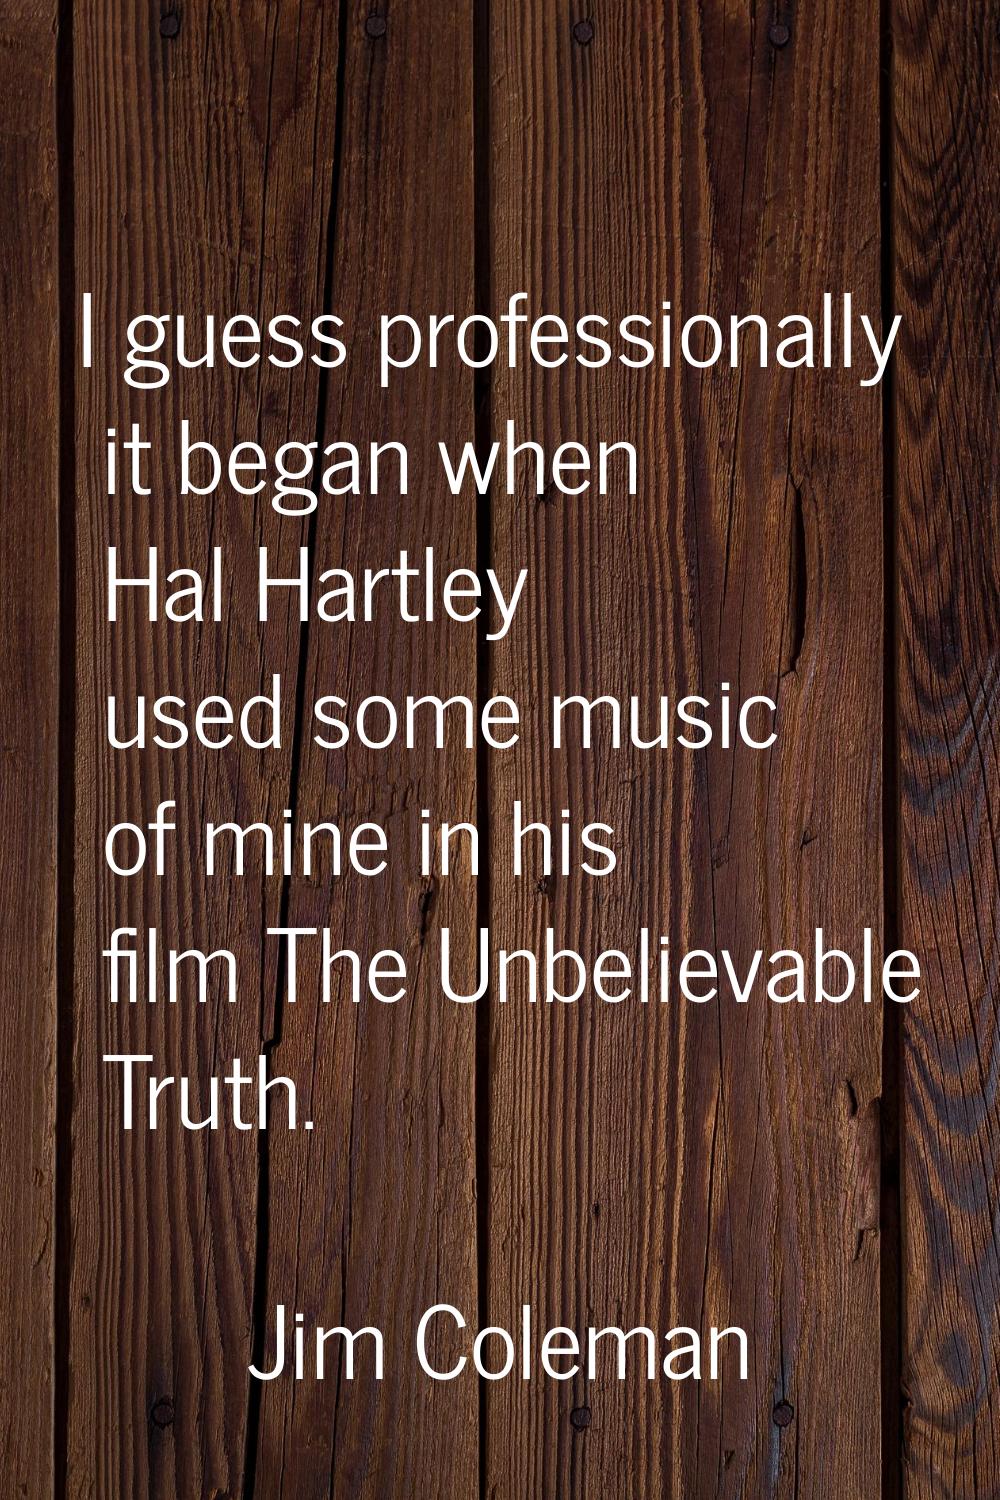 I guess professionally it began when Hal Hartley used some music of mine in his film The Unbelievab